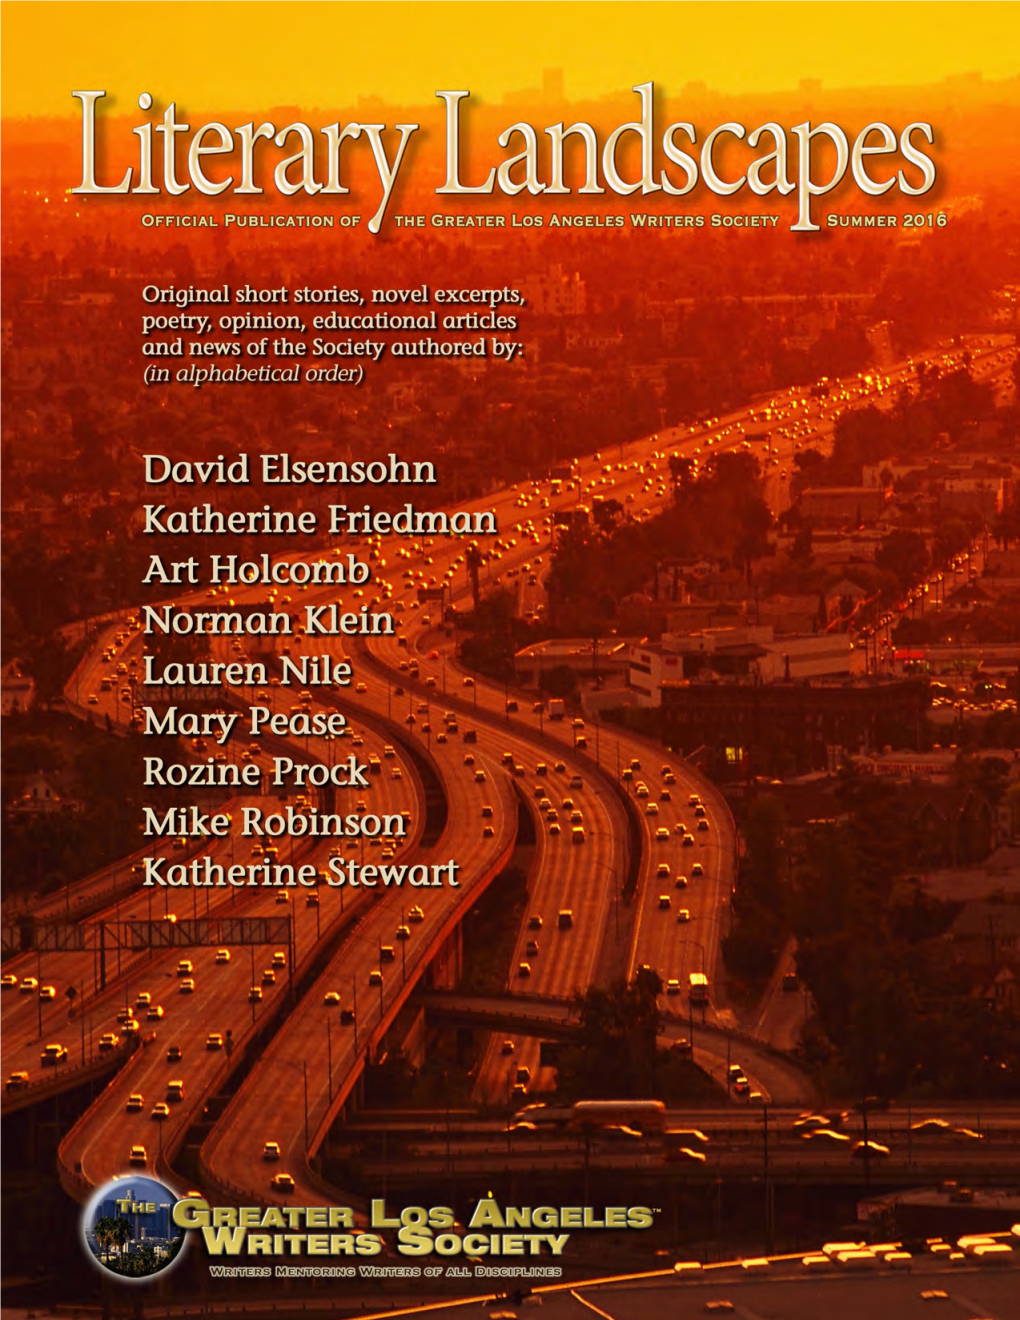 Literary Landscapes Magazine Is Intended for Mature Audiences